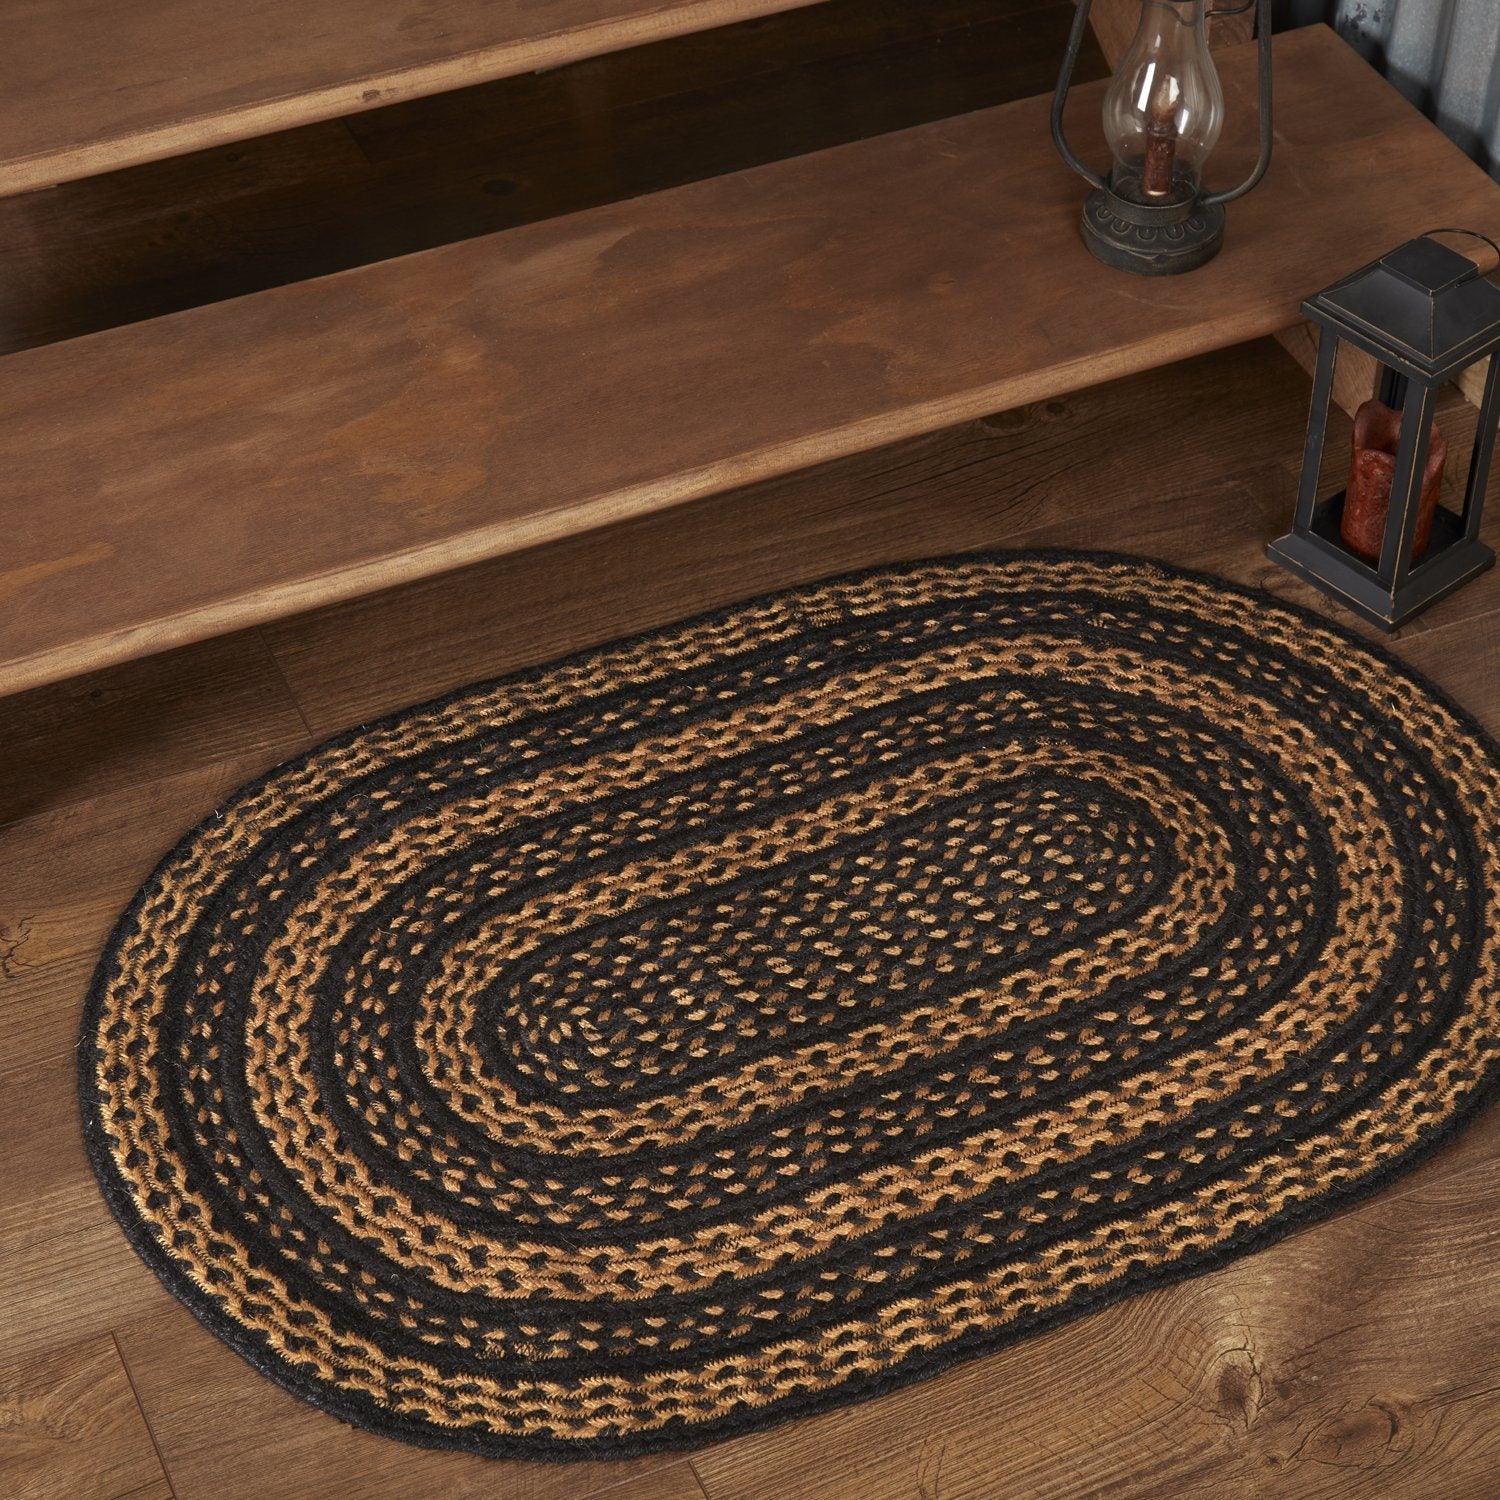 Great Falls Jute Oval Braided Rug w/ Pad - Retro Barn Country Linens